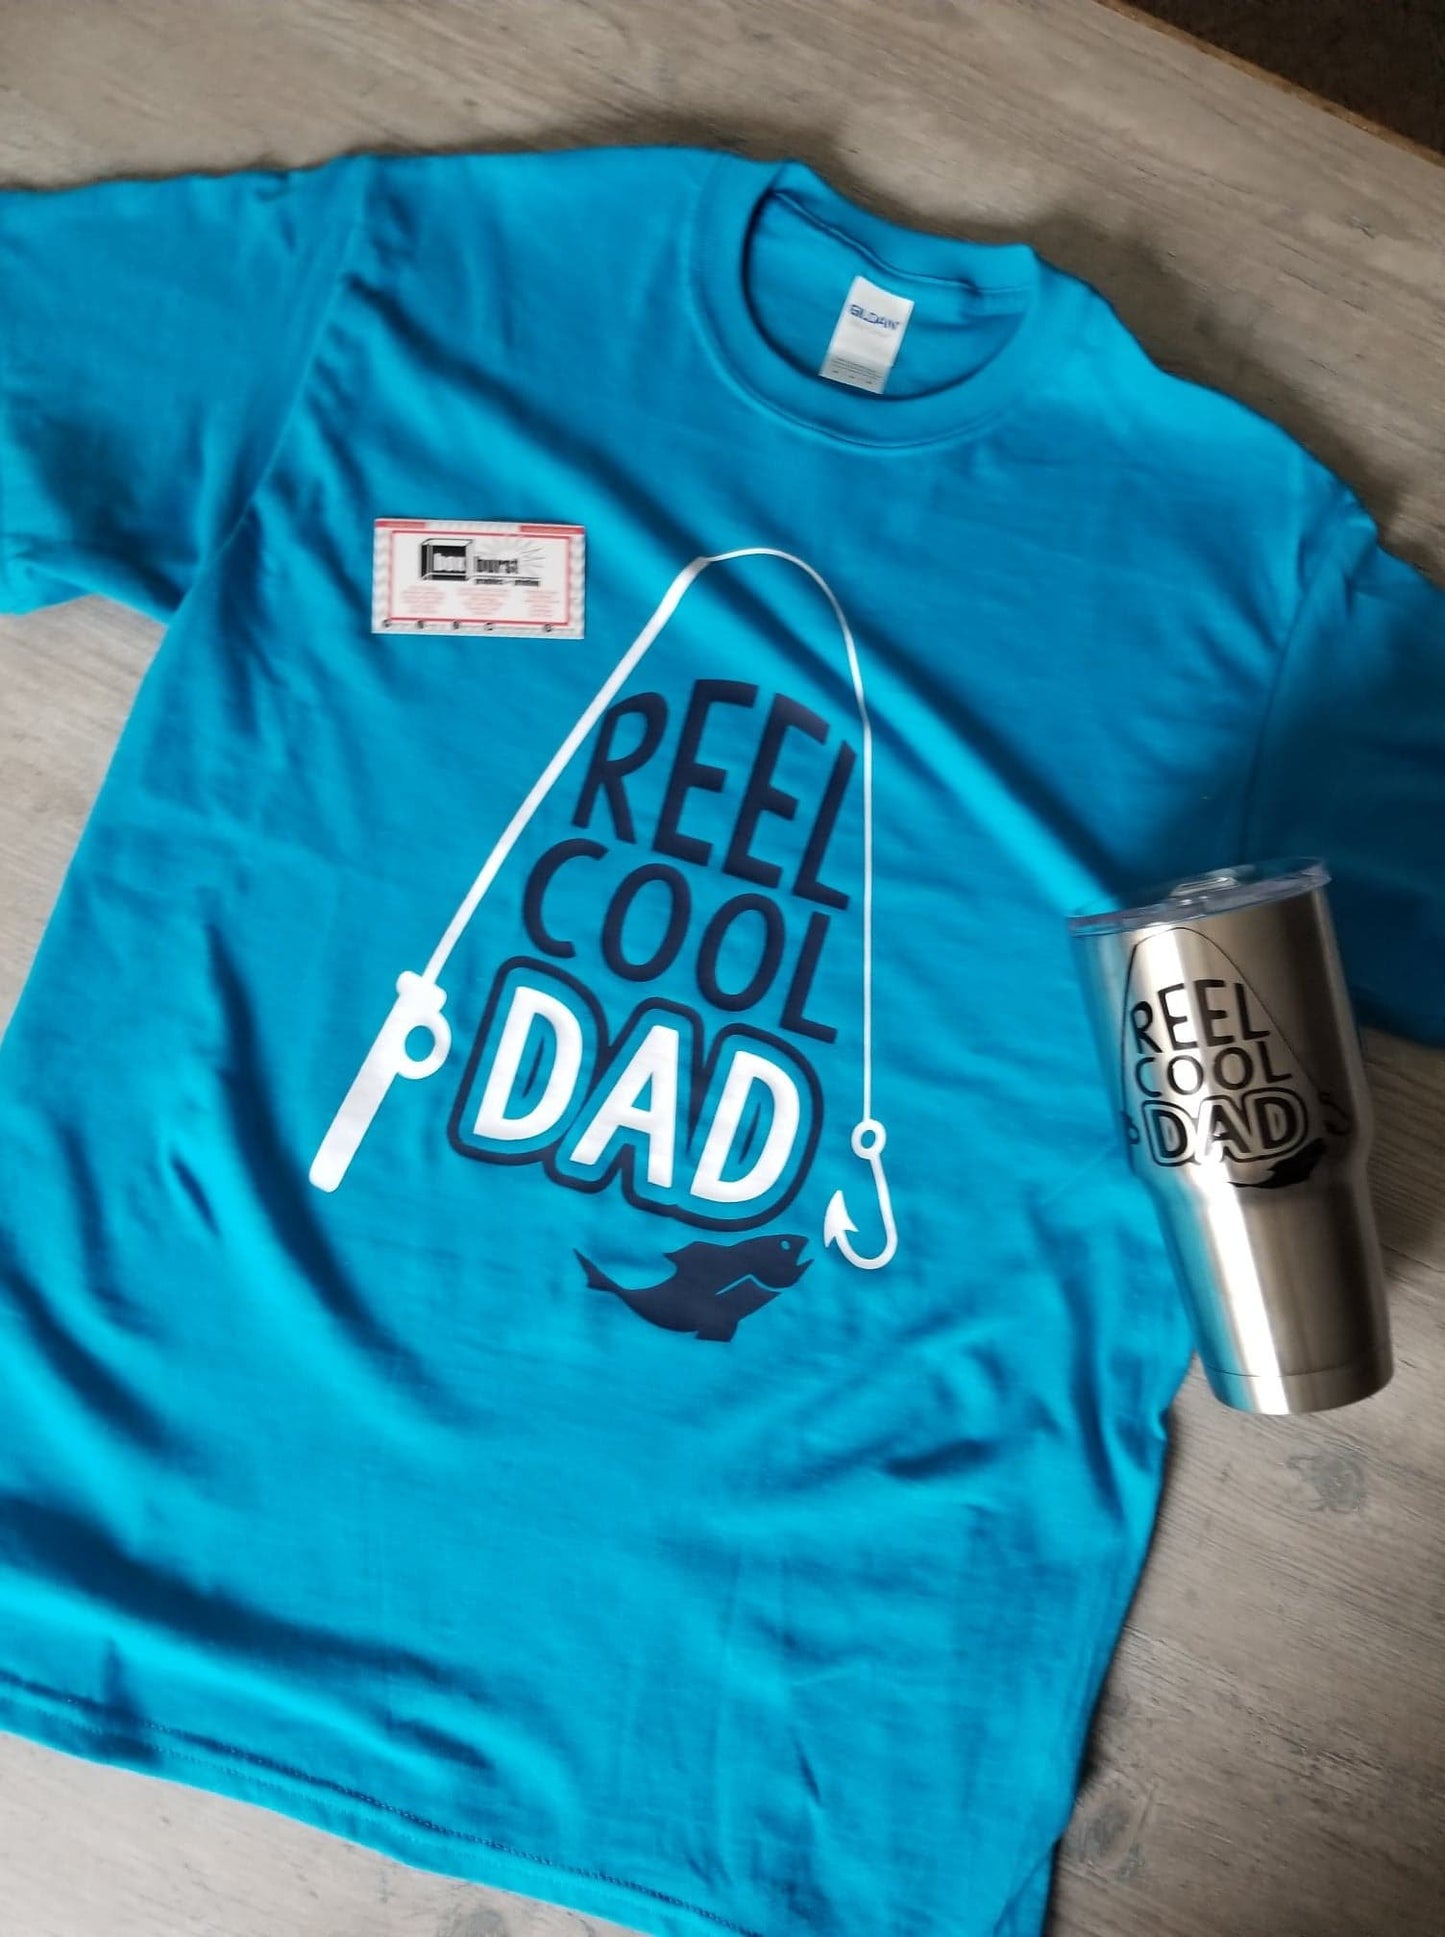 Dad Fishing Shirt | Reel Cool Dad | Fishing Dad | Gifts for Dads | Fathers Day Gift | Fishing | Real Cool Dad | t shirt |